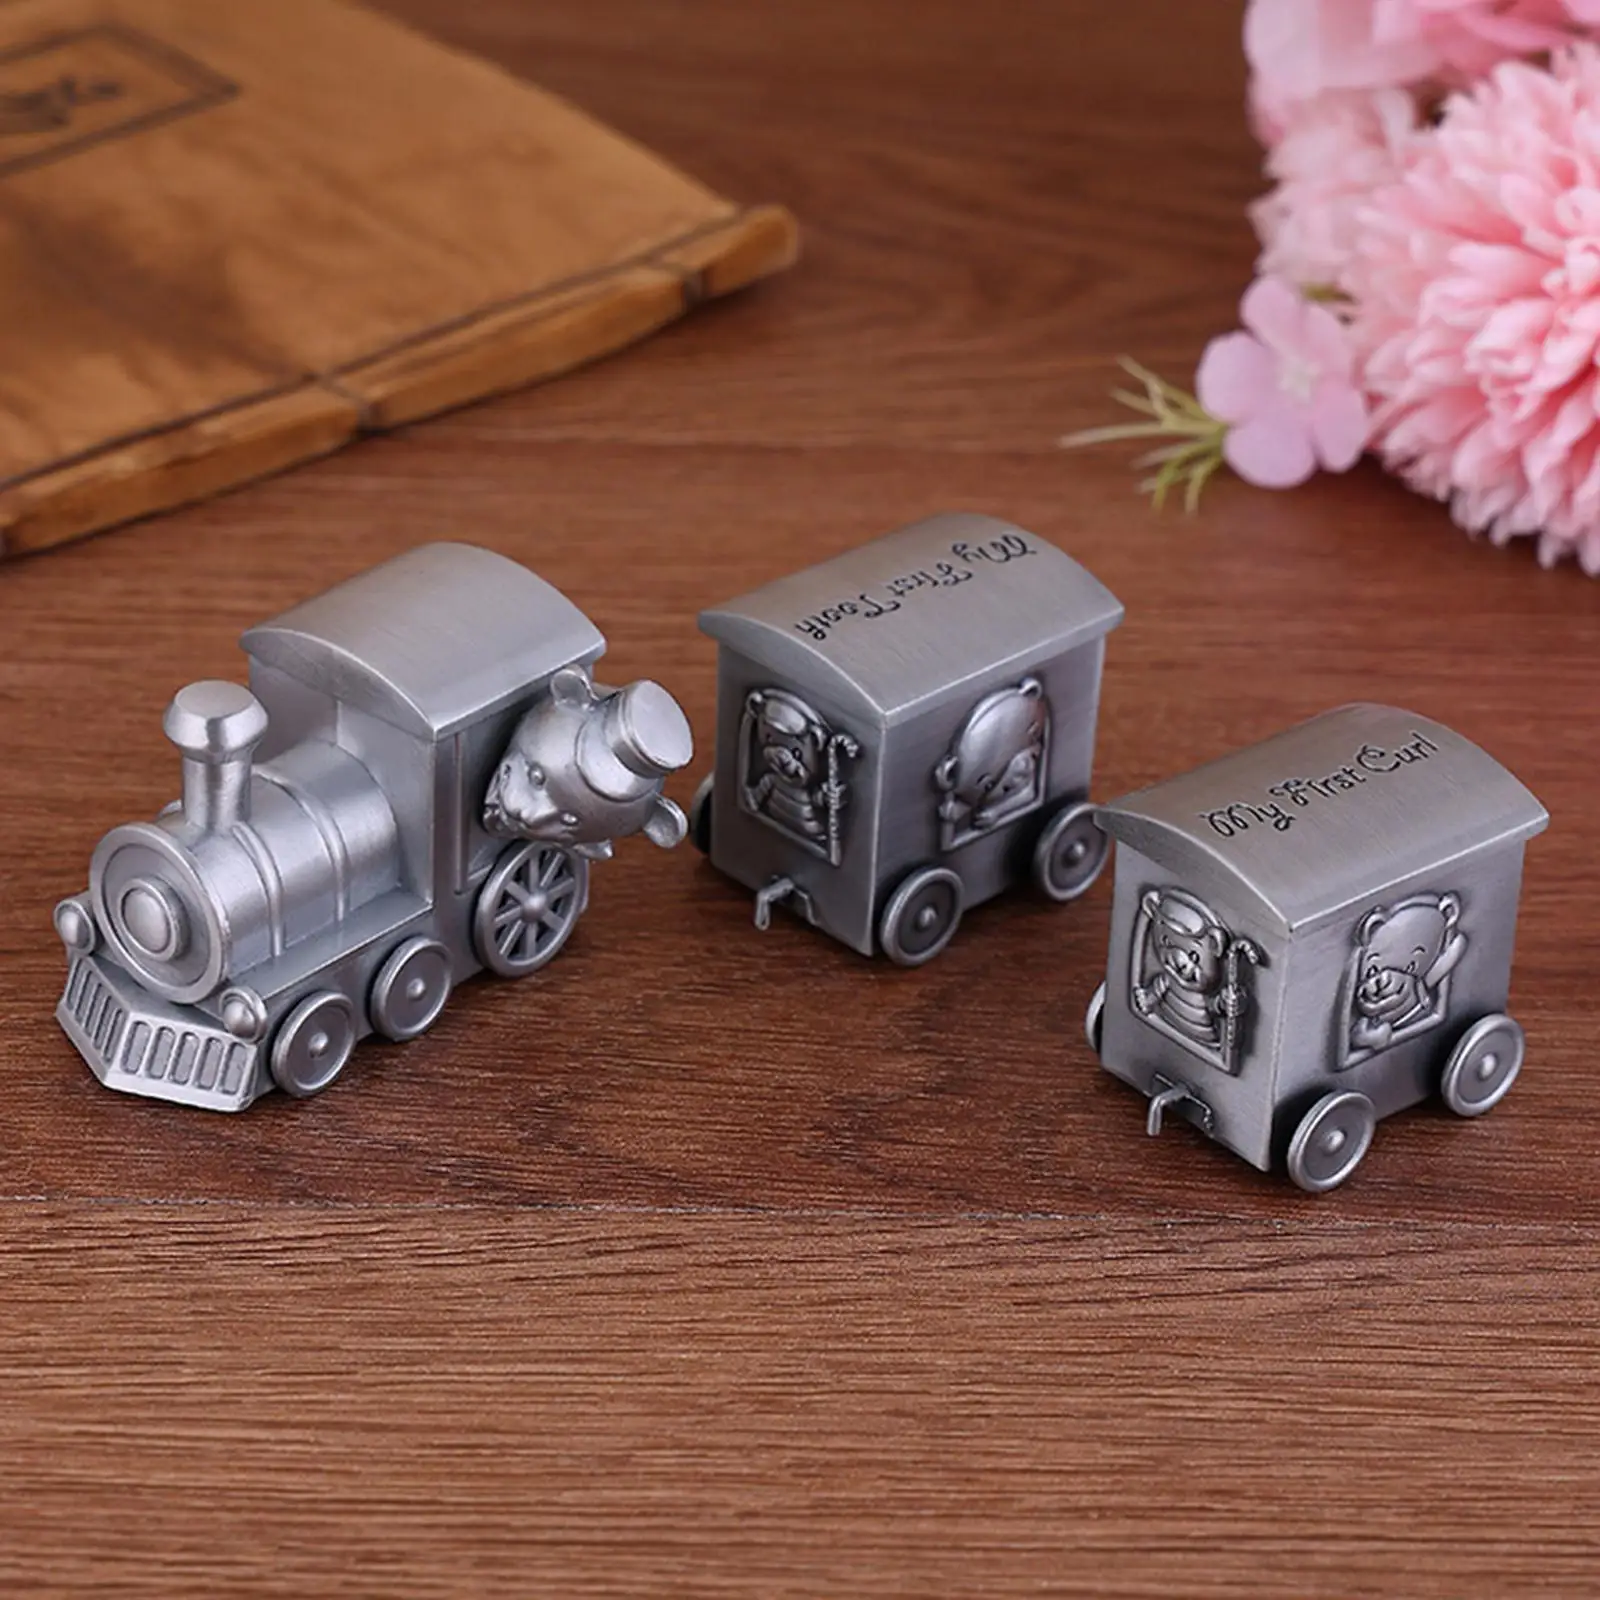 Baby Keepsakes Box Holder Container Childhood Memory Metal Collections Box for Souvenir Childhood Baby Shower Nusery Decor